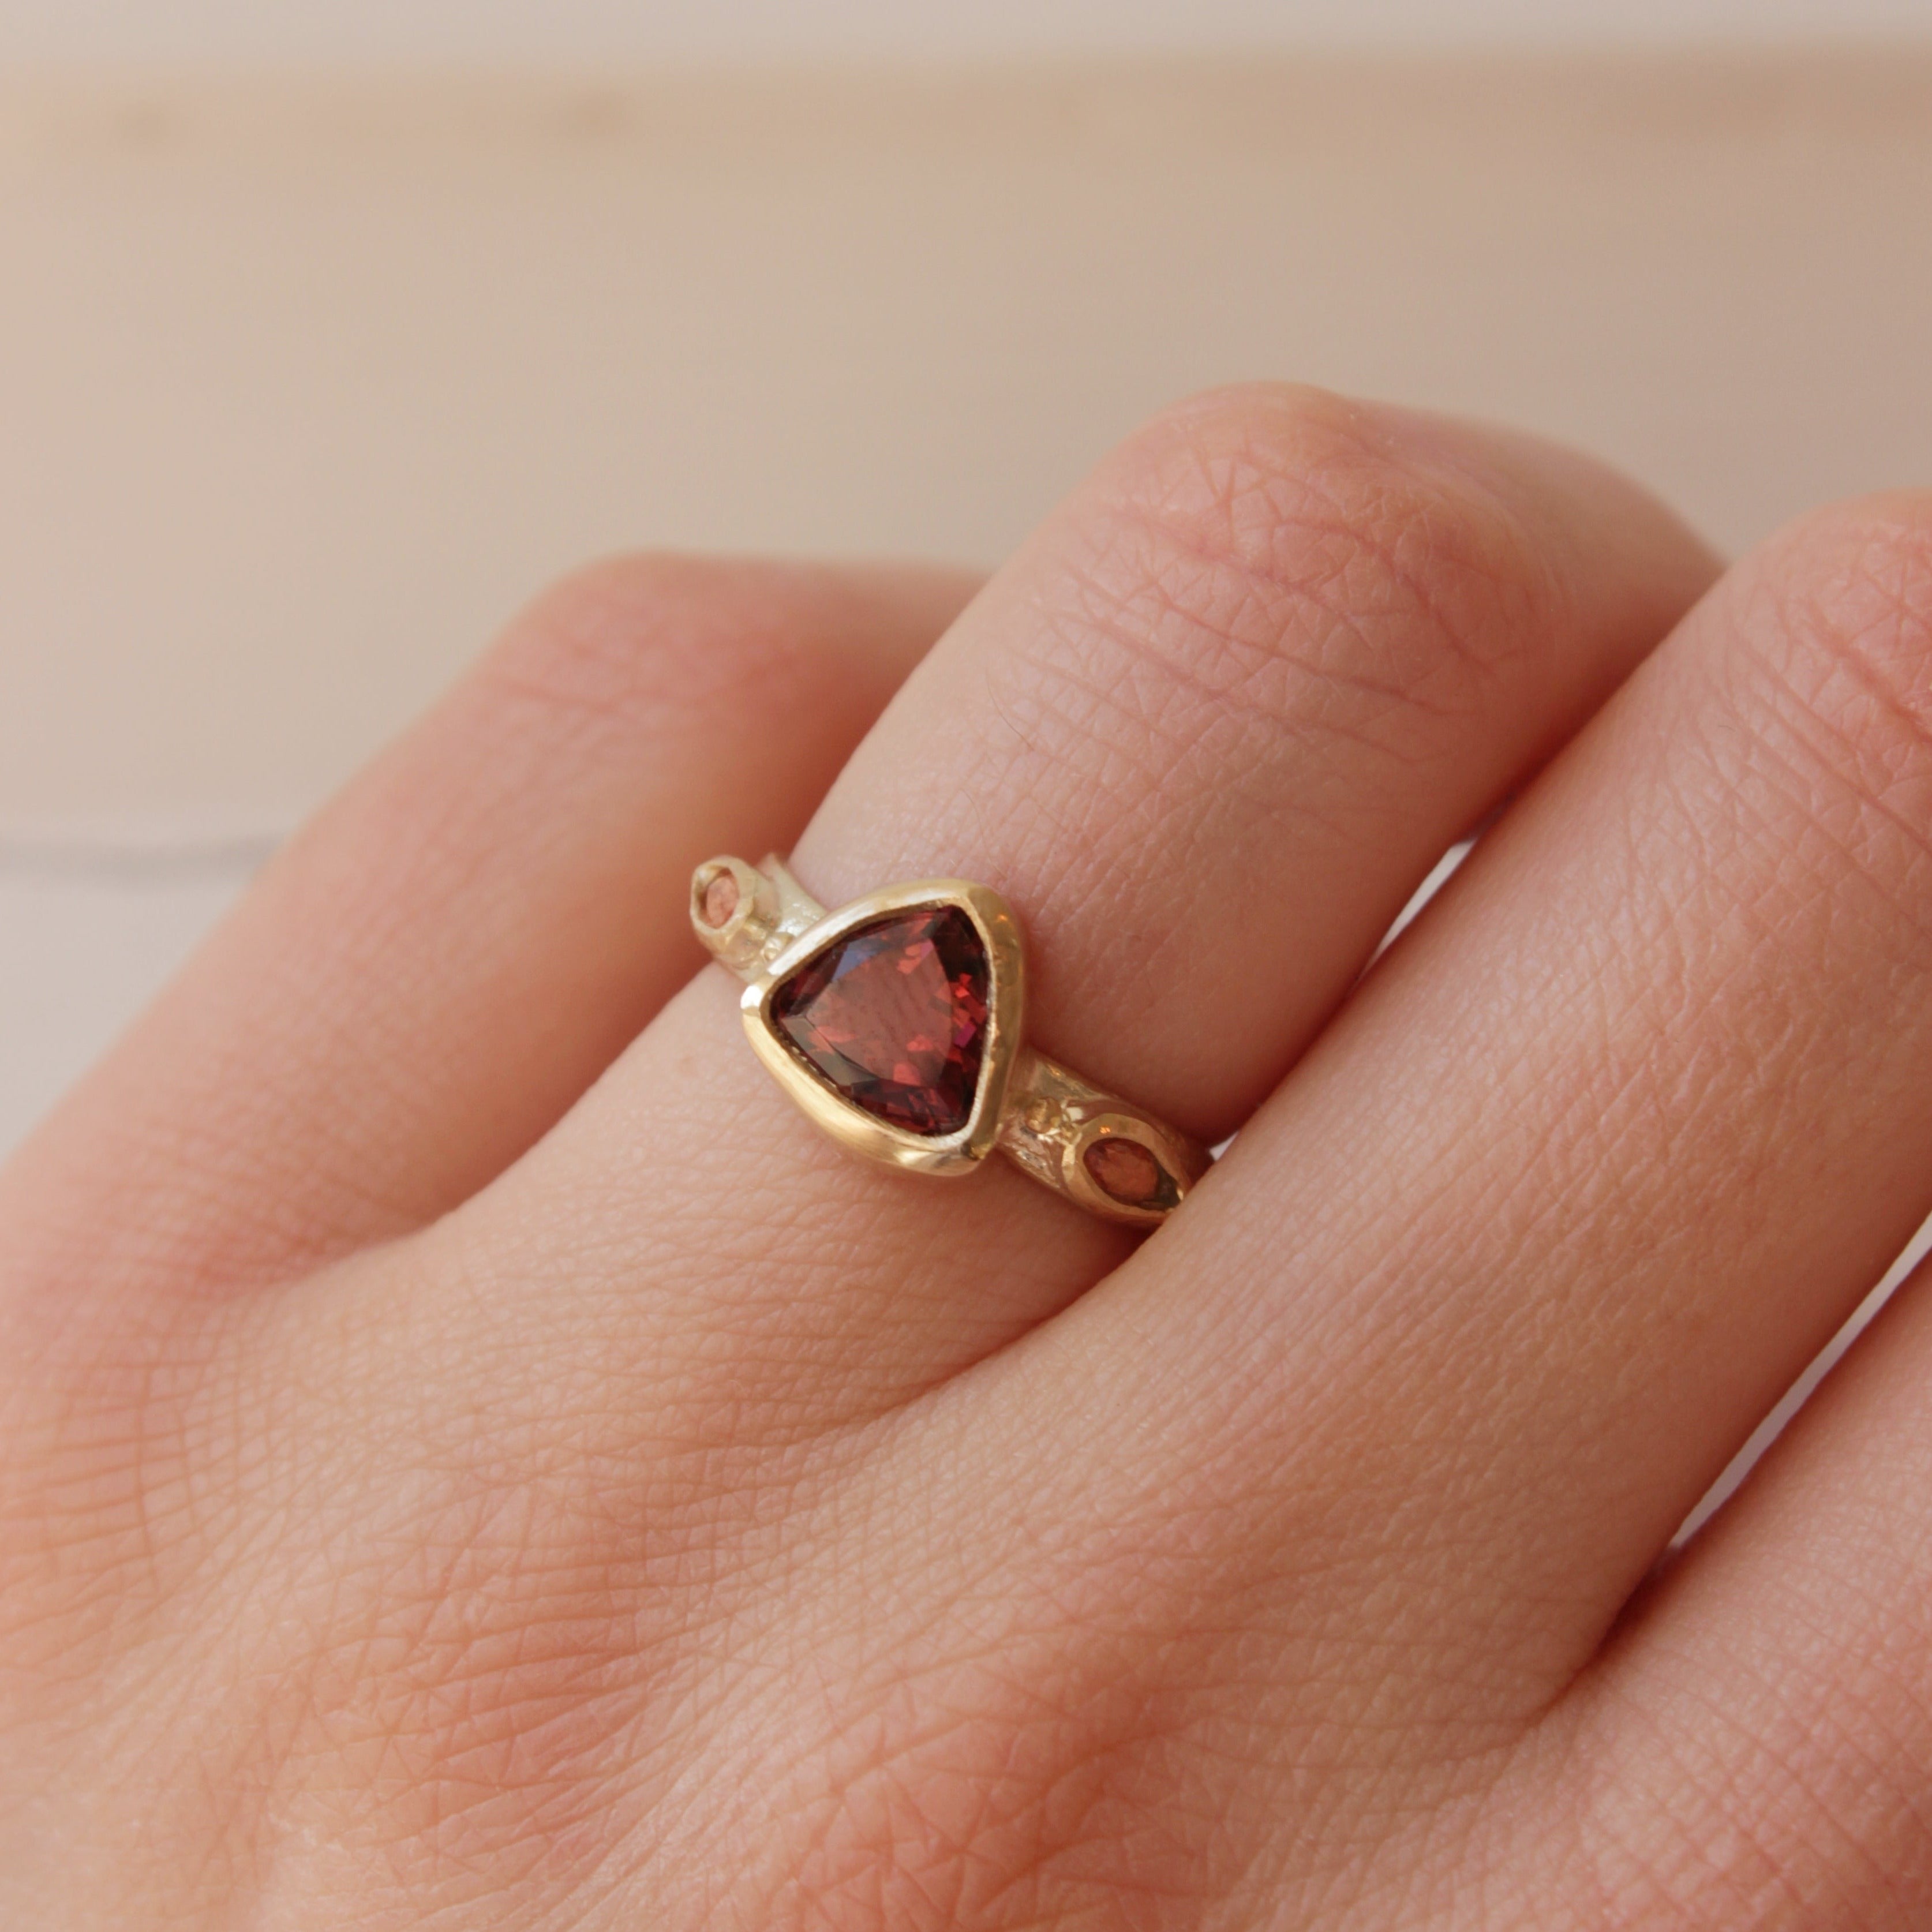 Alternative pink tourmaline engagement ring, handcrafted by Josie Mitchell jewellery in Frome, Somerset. Featuring a stunning deep pink tourmaline stone with peach coloured sapphires on either side and delicate gold granules.